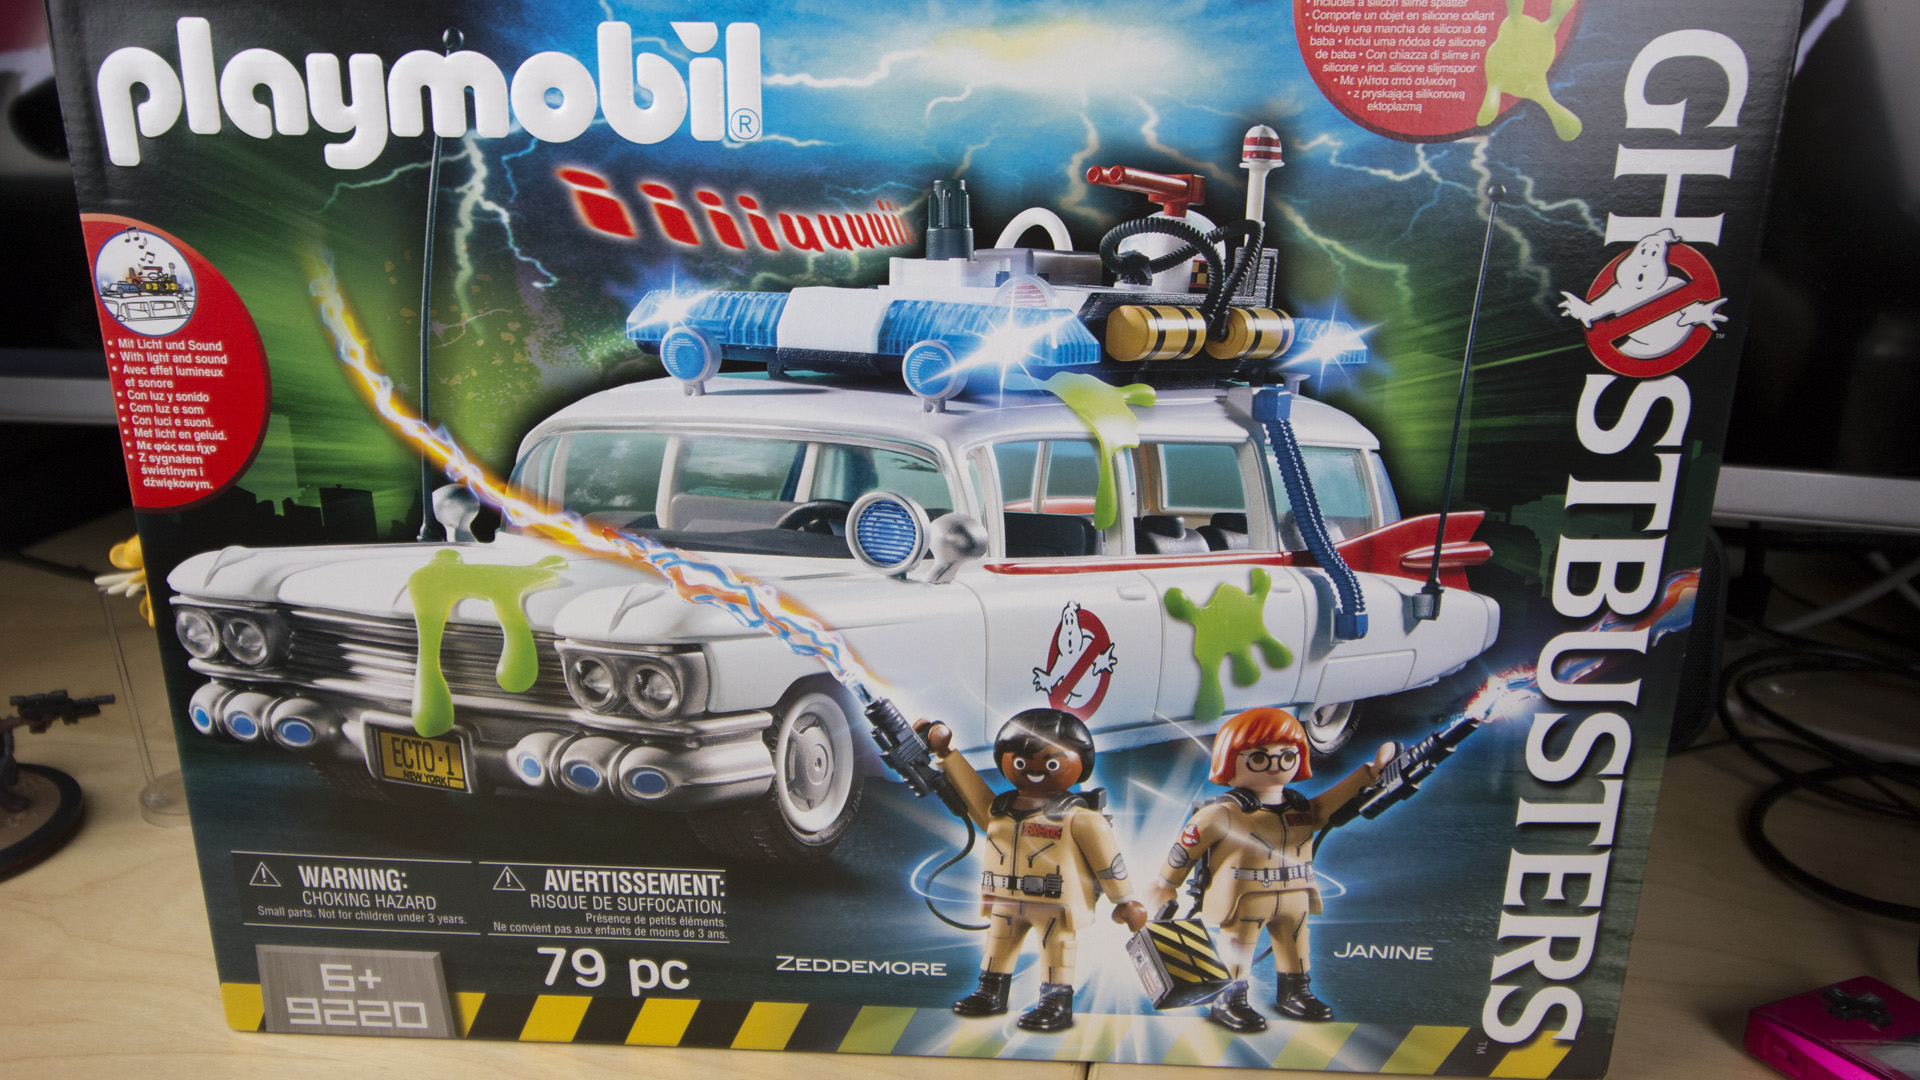 Toy Time Celebrates Ghostbusters Day With Playmobil’s Ecto-1